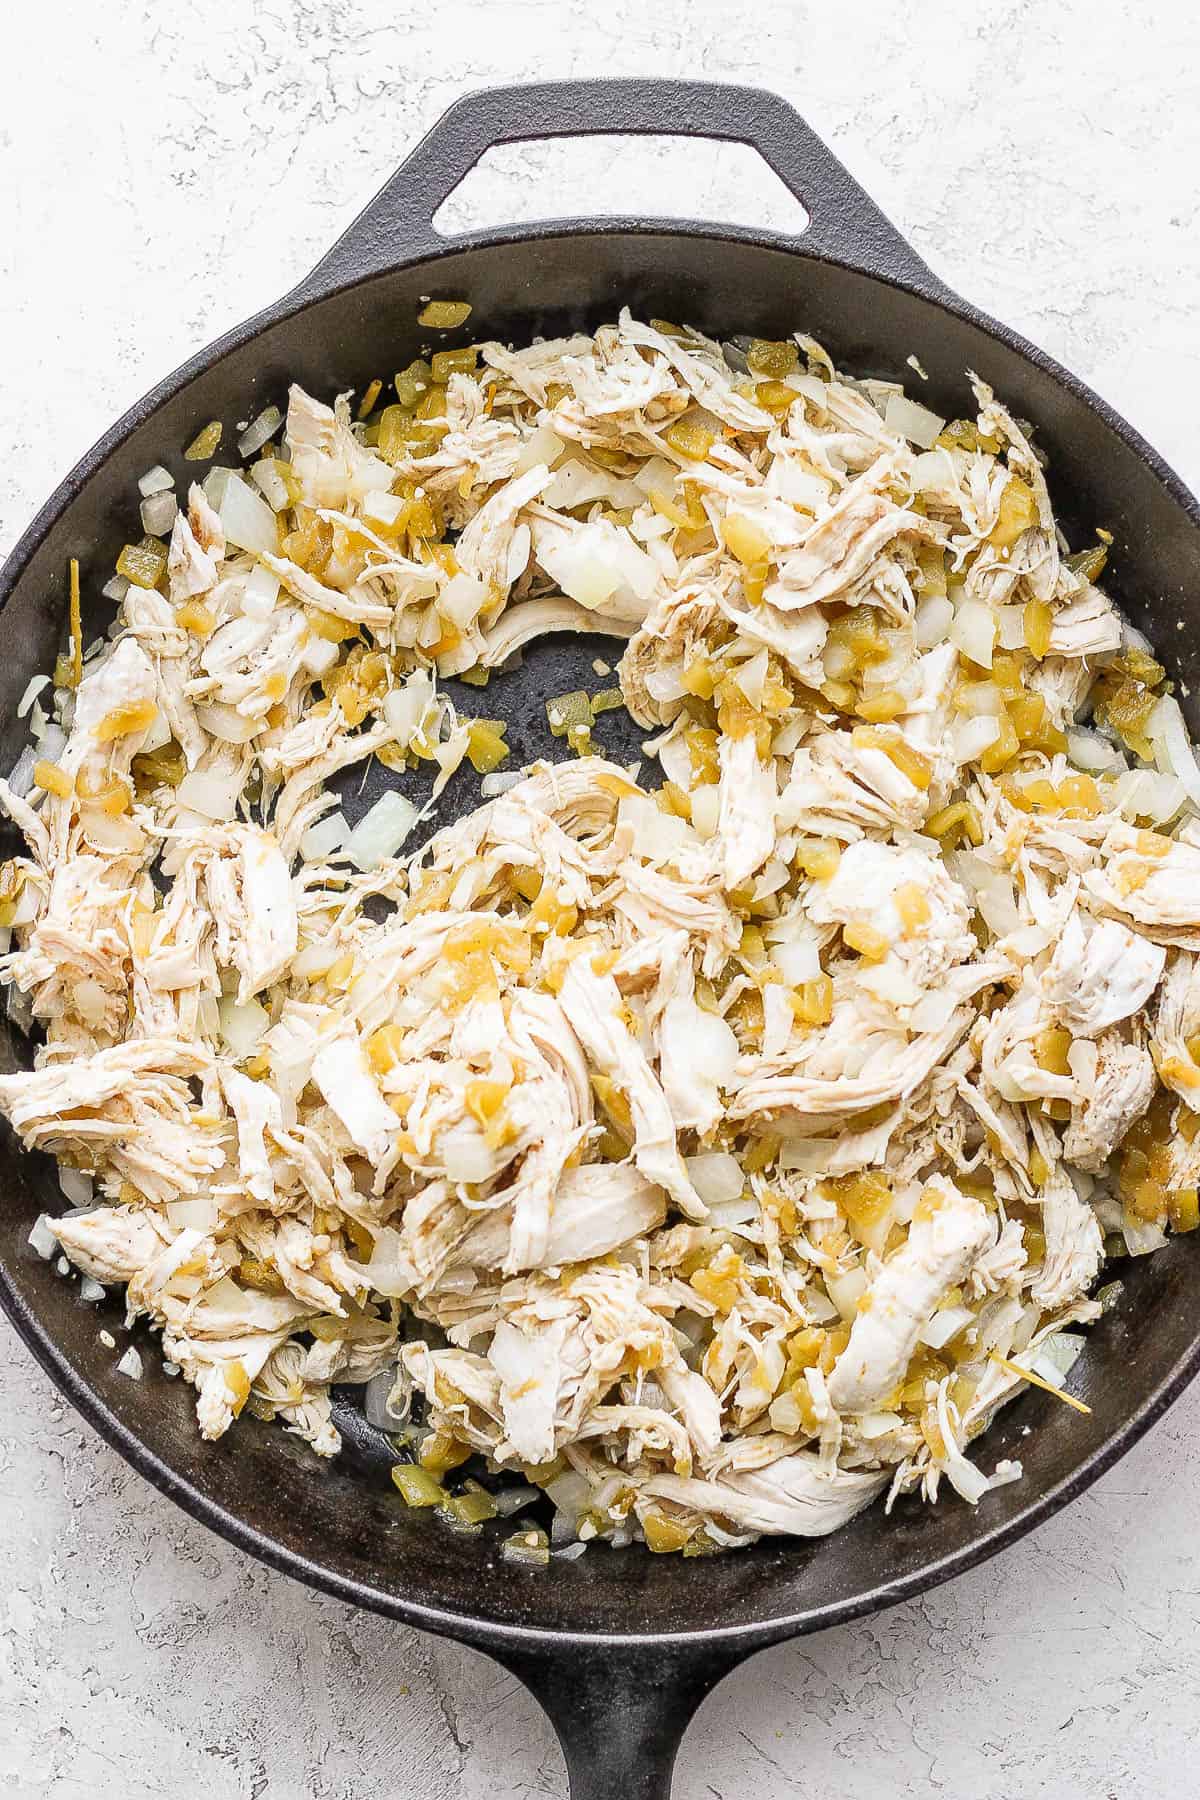 Onion, garlic, green chilis, shredded chicken, and spices in a cast iron skillet.